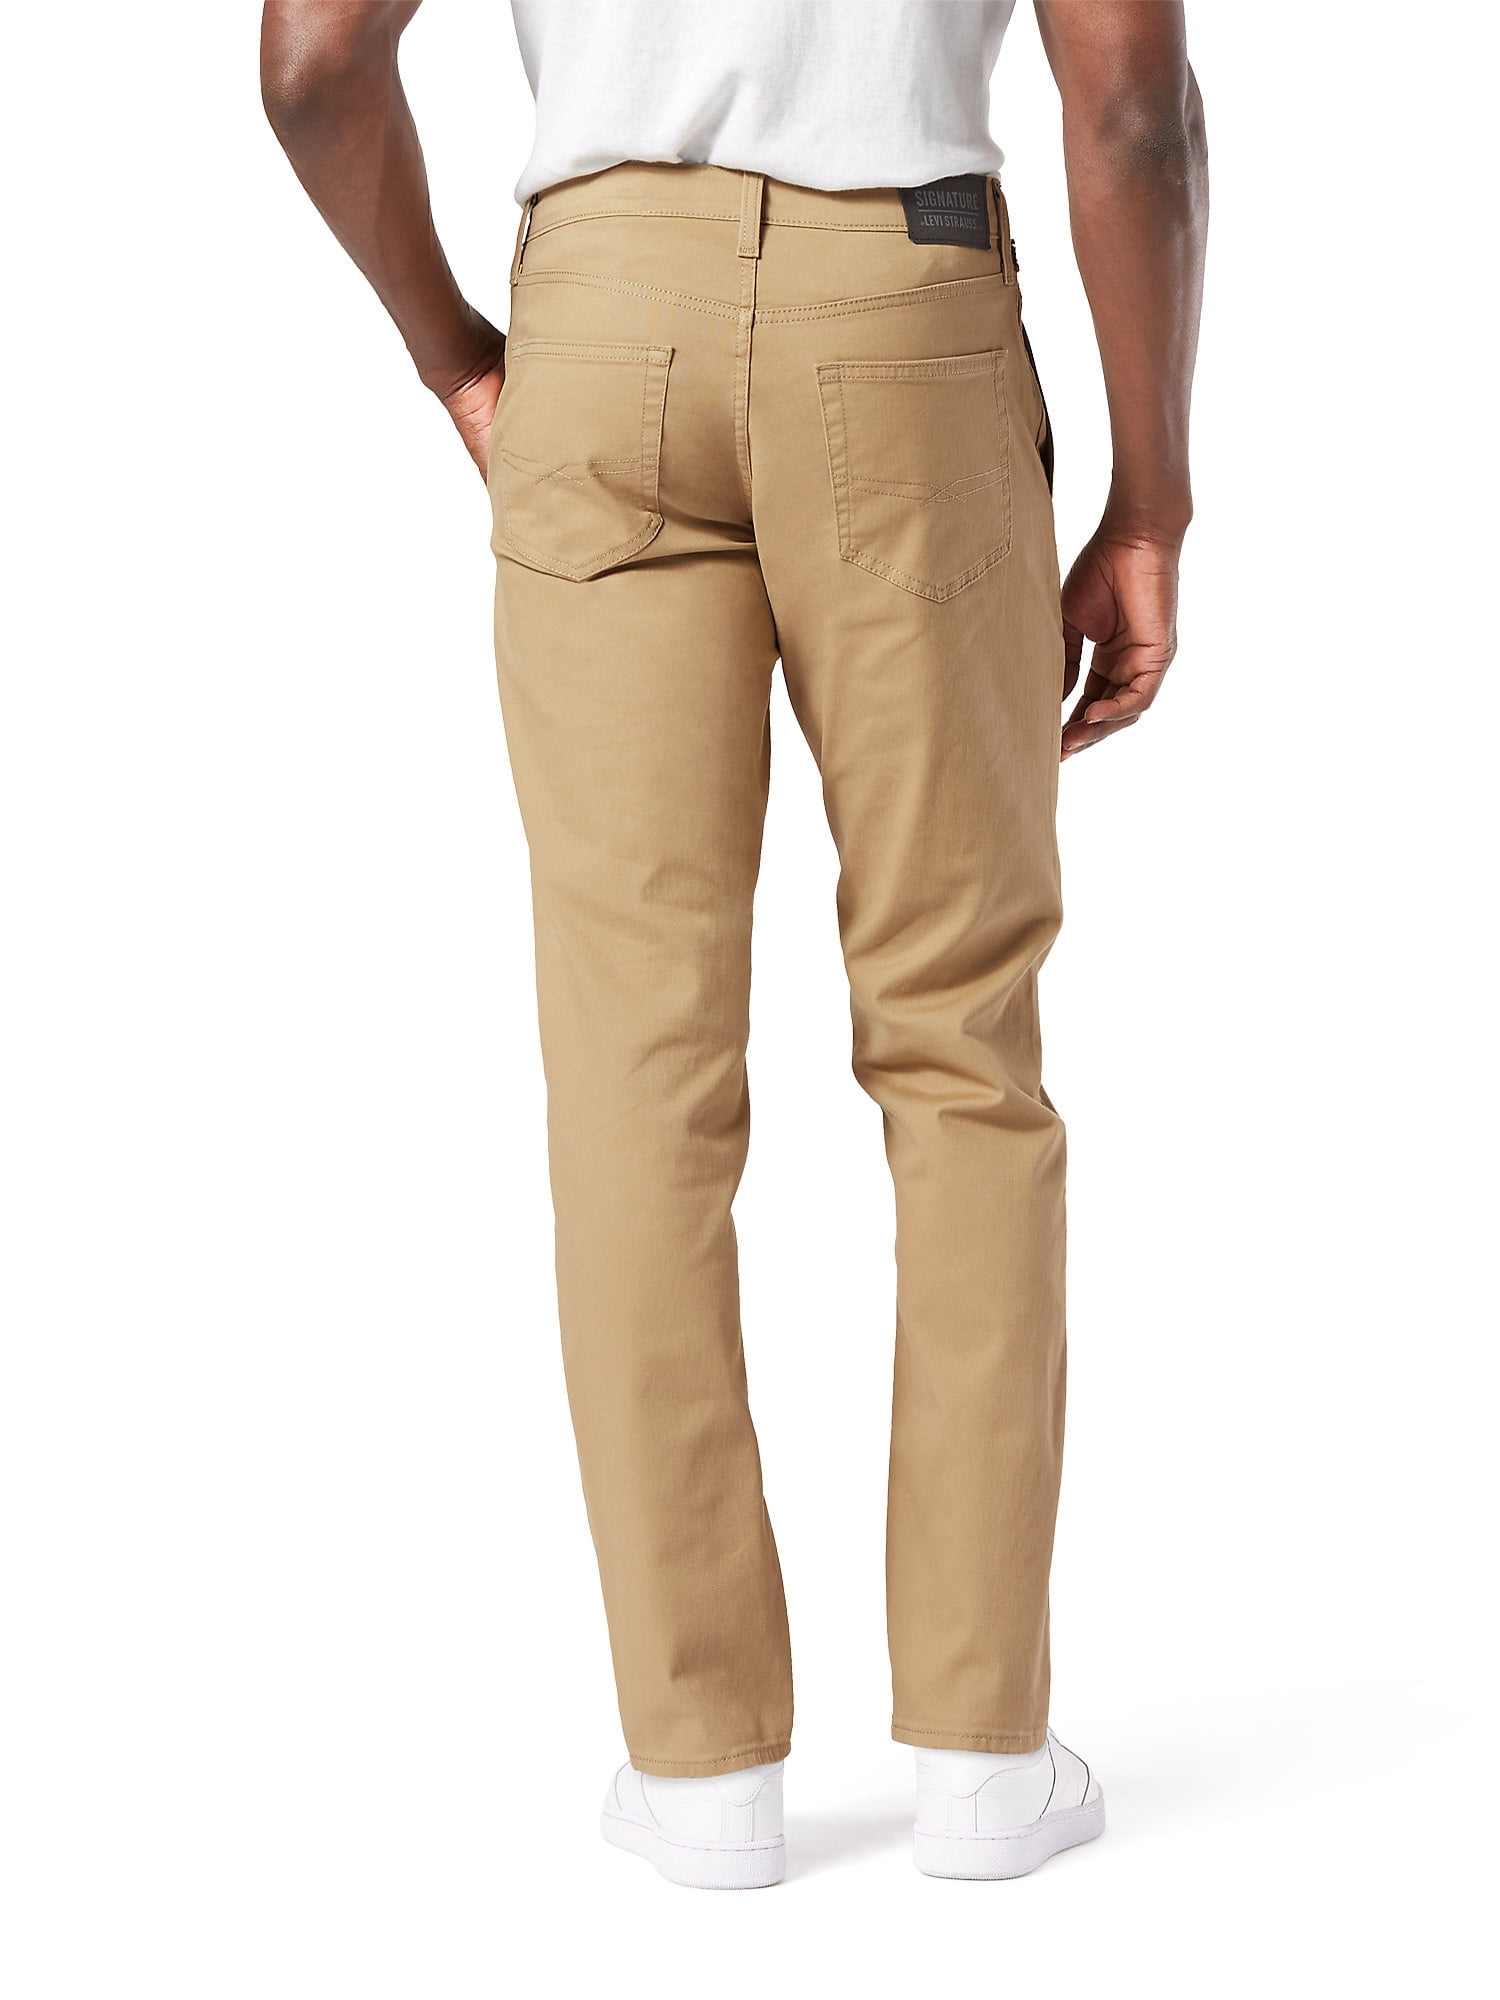 Signature By Levi Strauss & Co. Men's and Big Men's Athletic Hybrid Chino -  